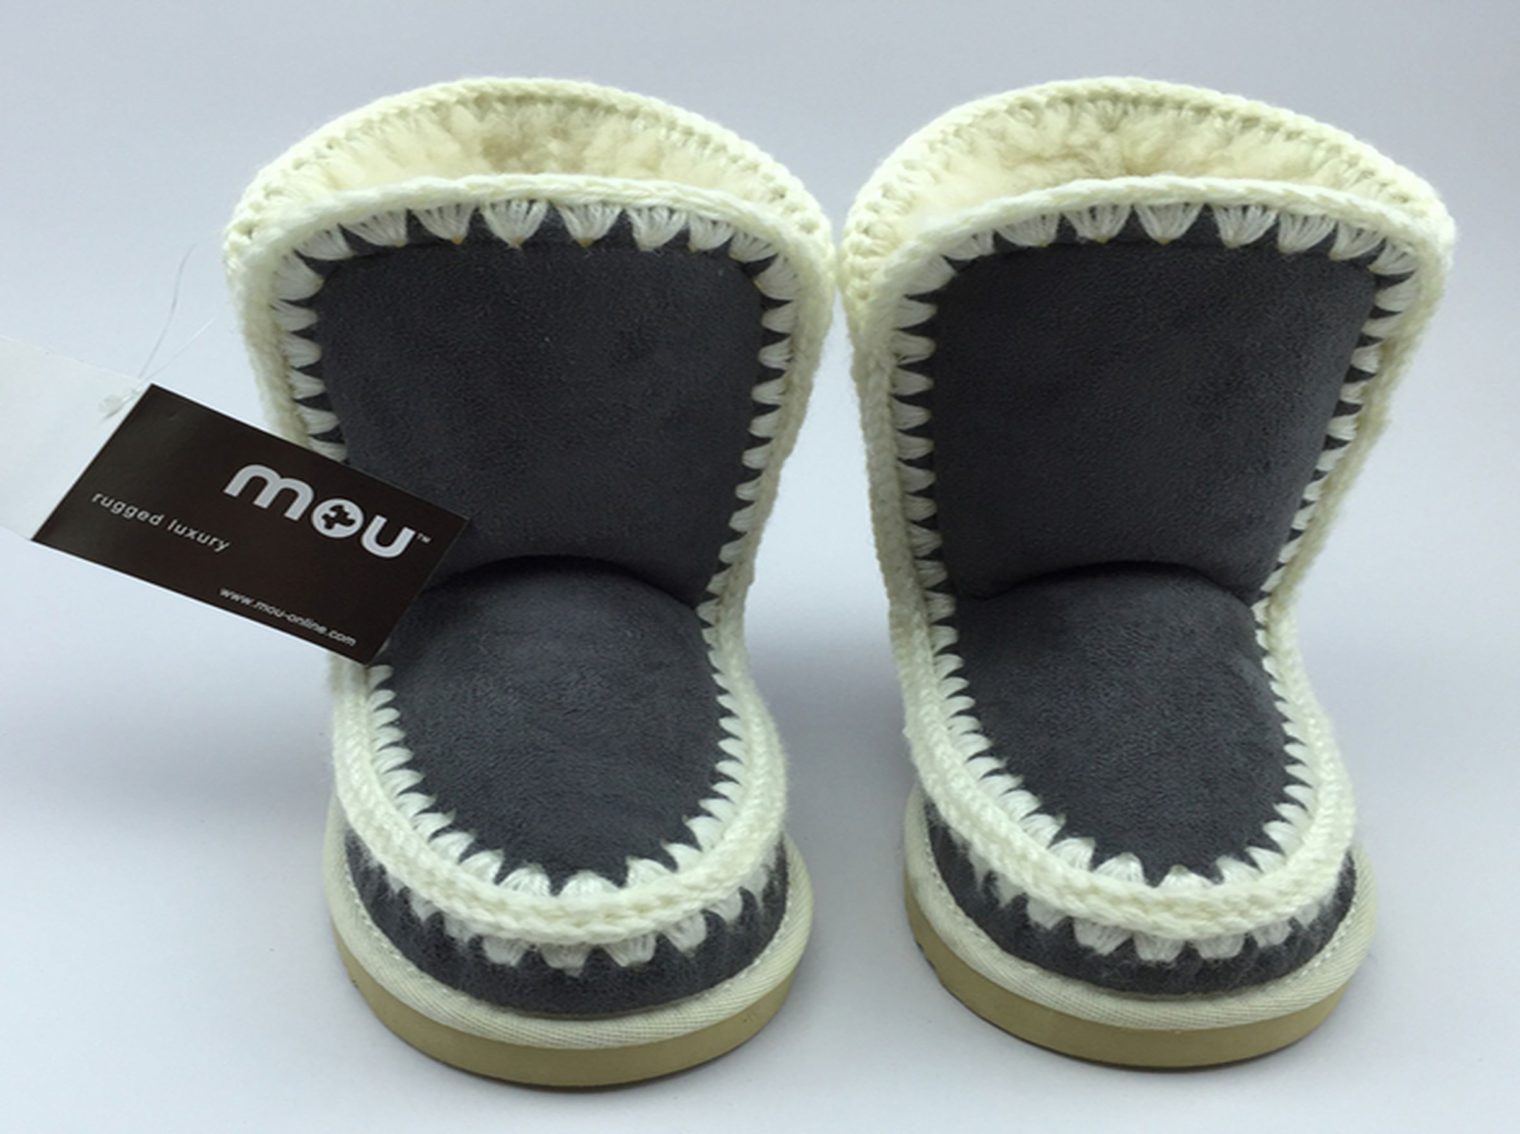 uggs-mou-a225-1